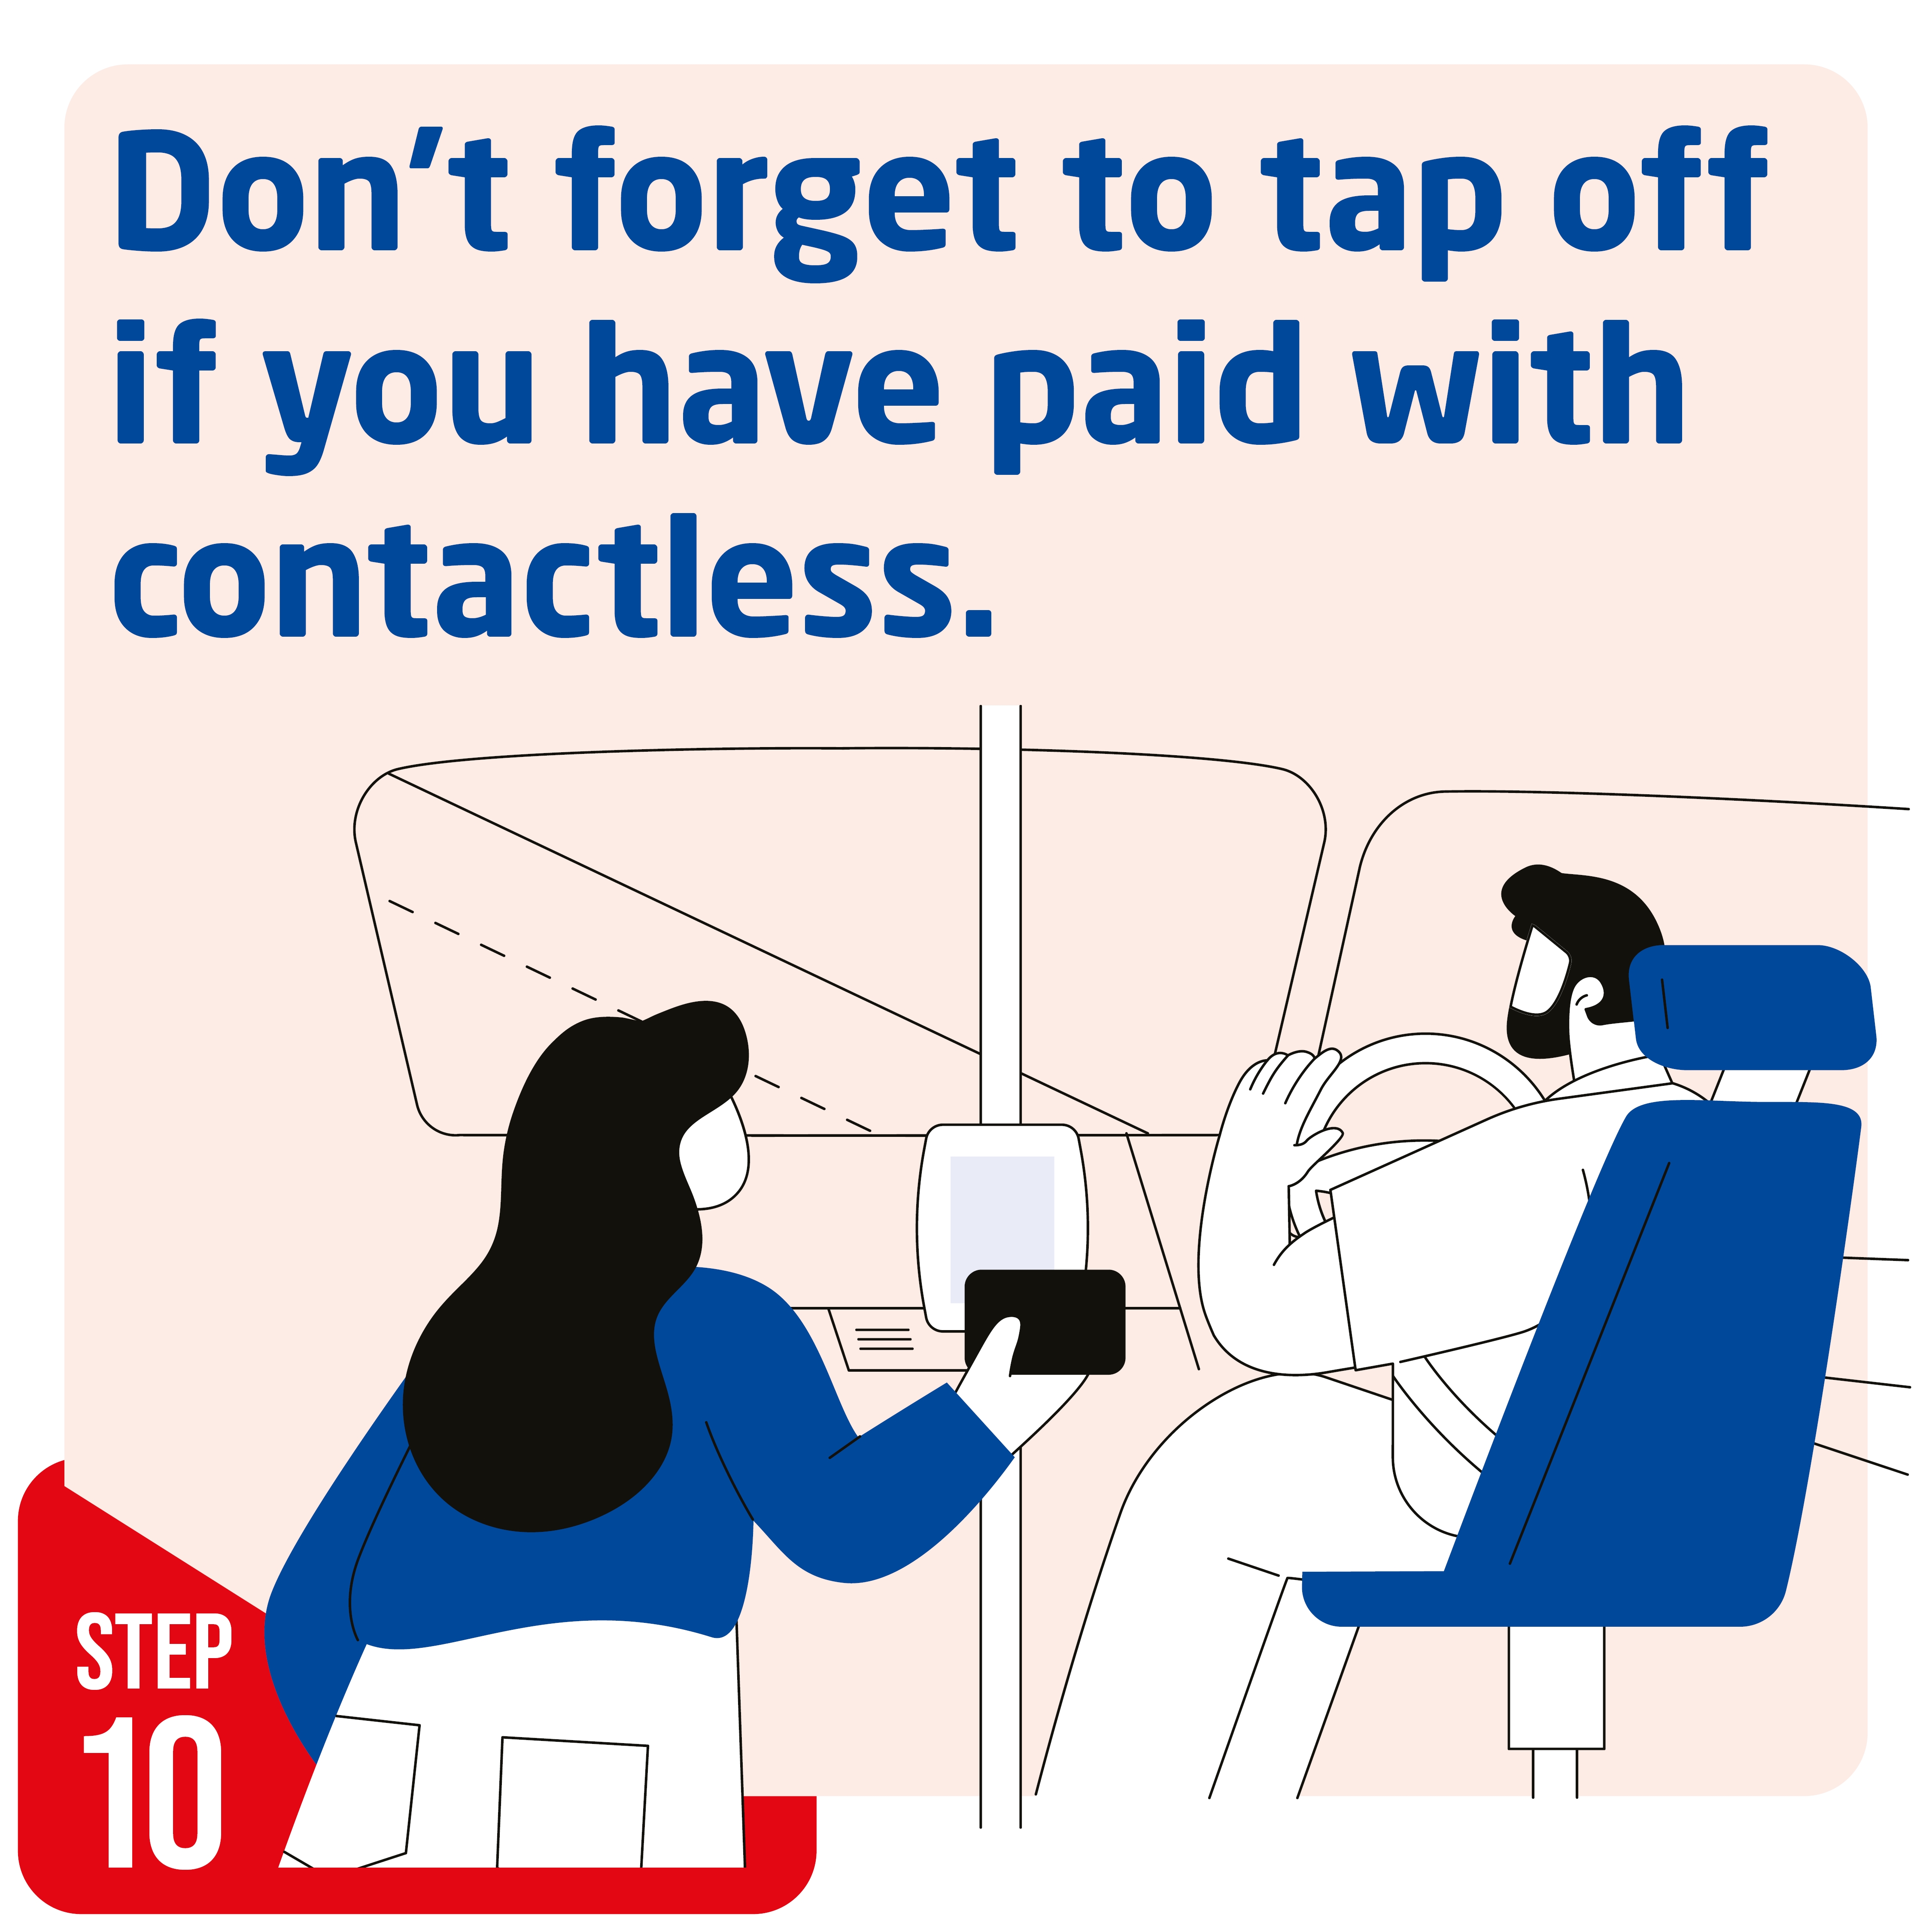 Don't forget to tap off if you've paid with contactless